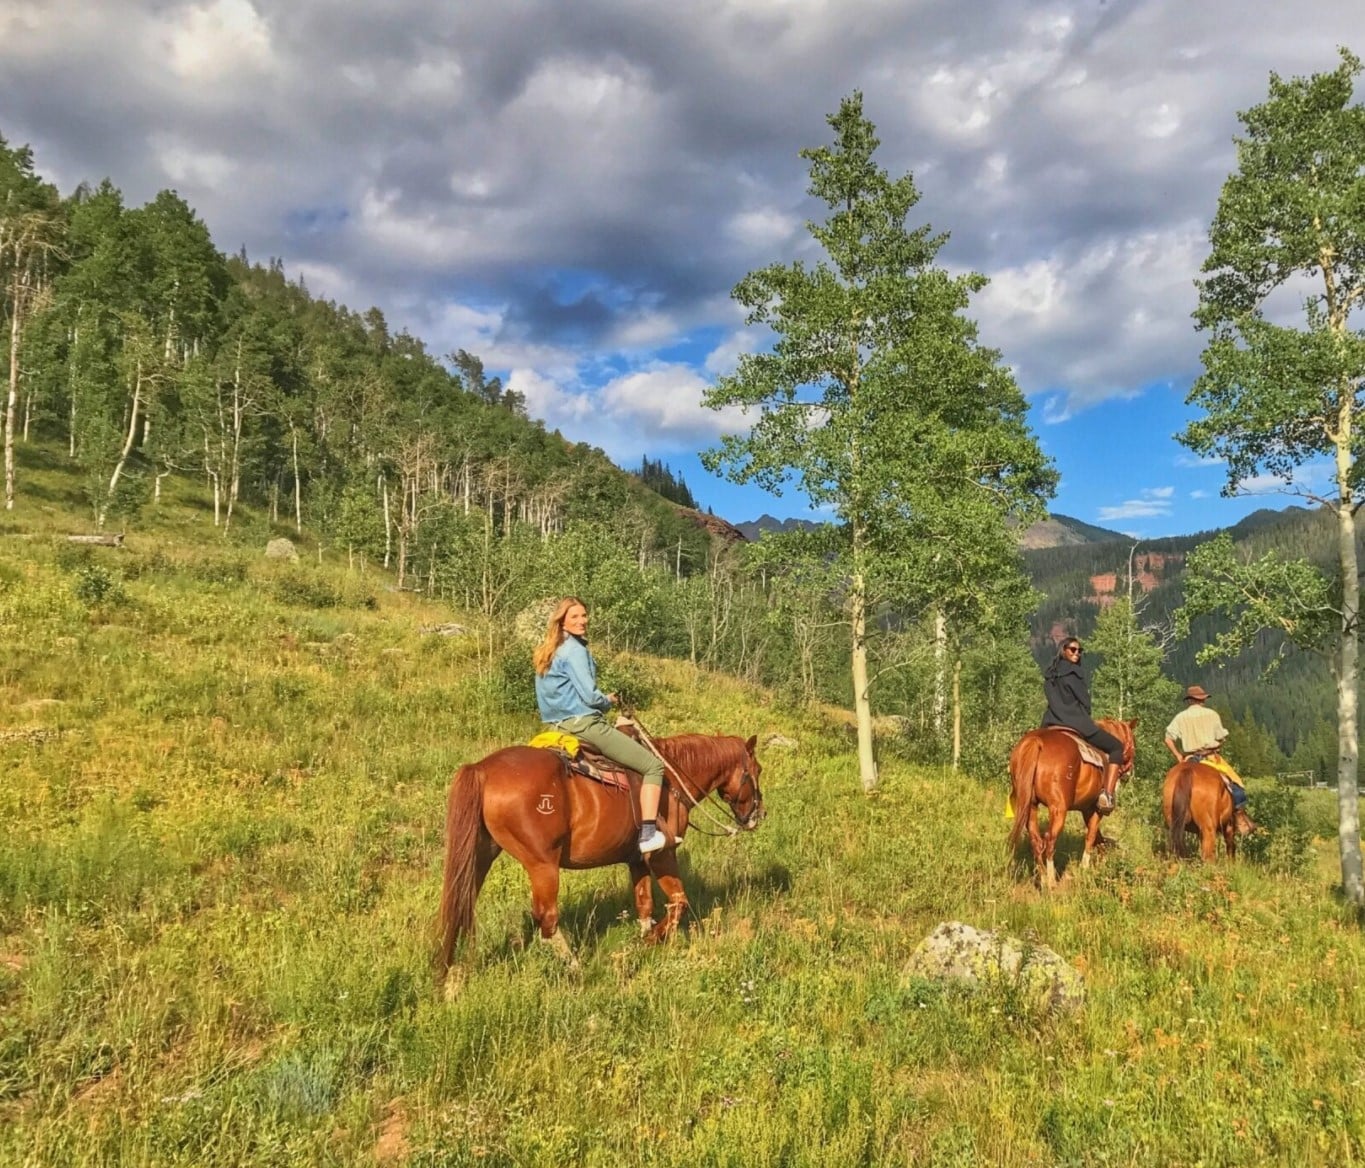 Three people ride chocolate-colored horses through a grassy field surrounded by trees in Vail, Colorado.